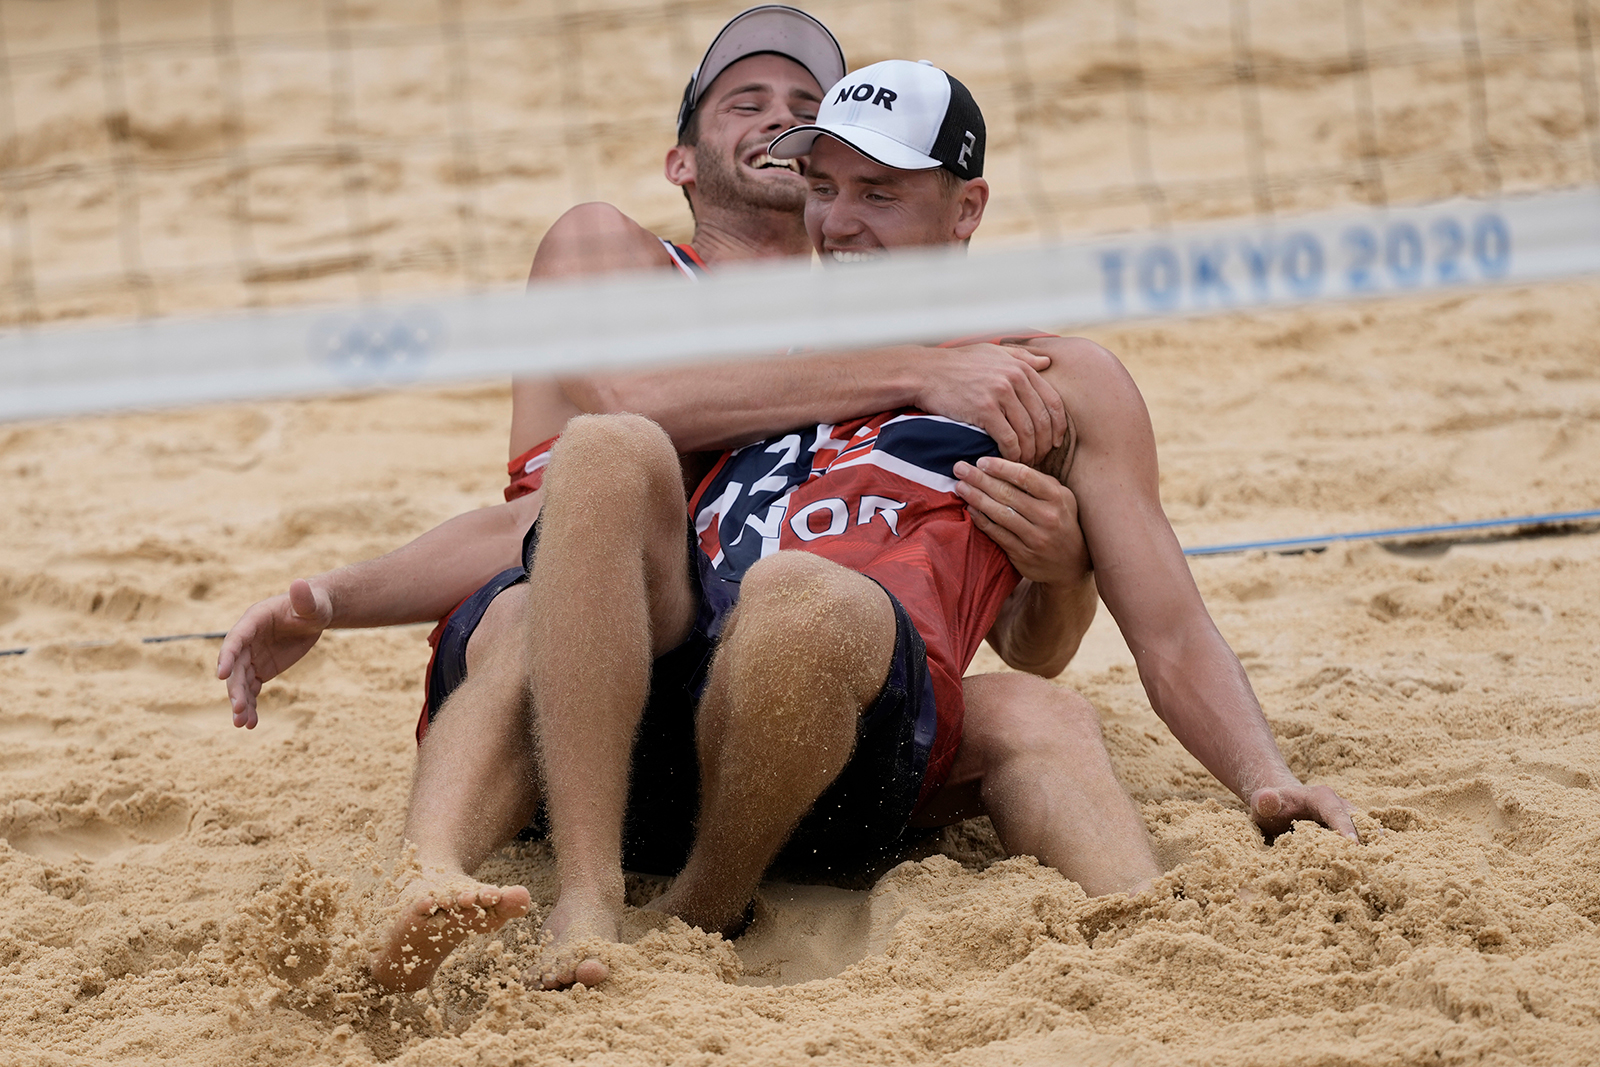 Norway's Anders Berntsen Mol, left, and teammate Christian Sørum celebrate winning a beach volleyball gold medal on Saturday.